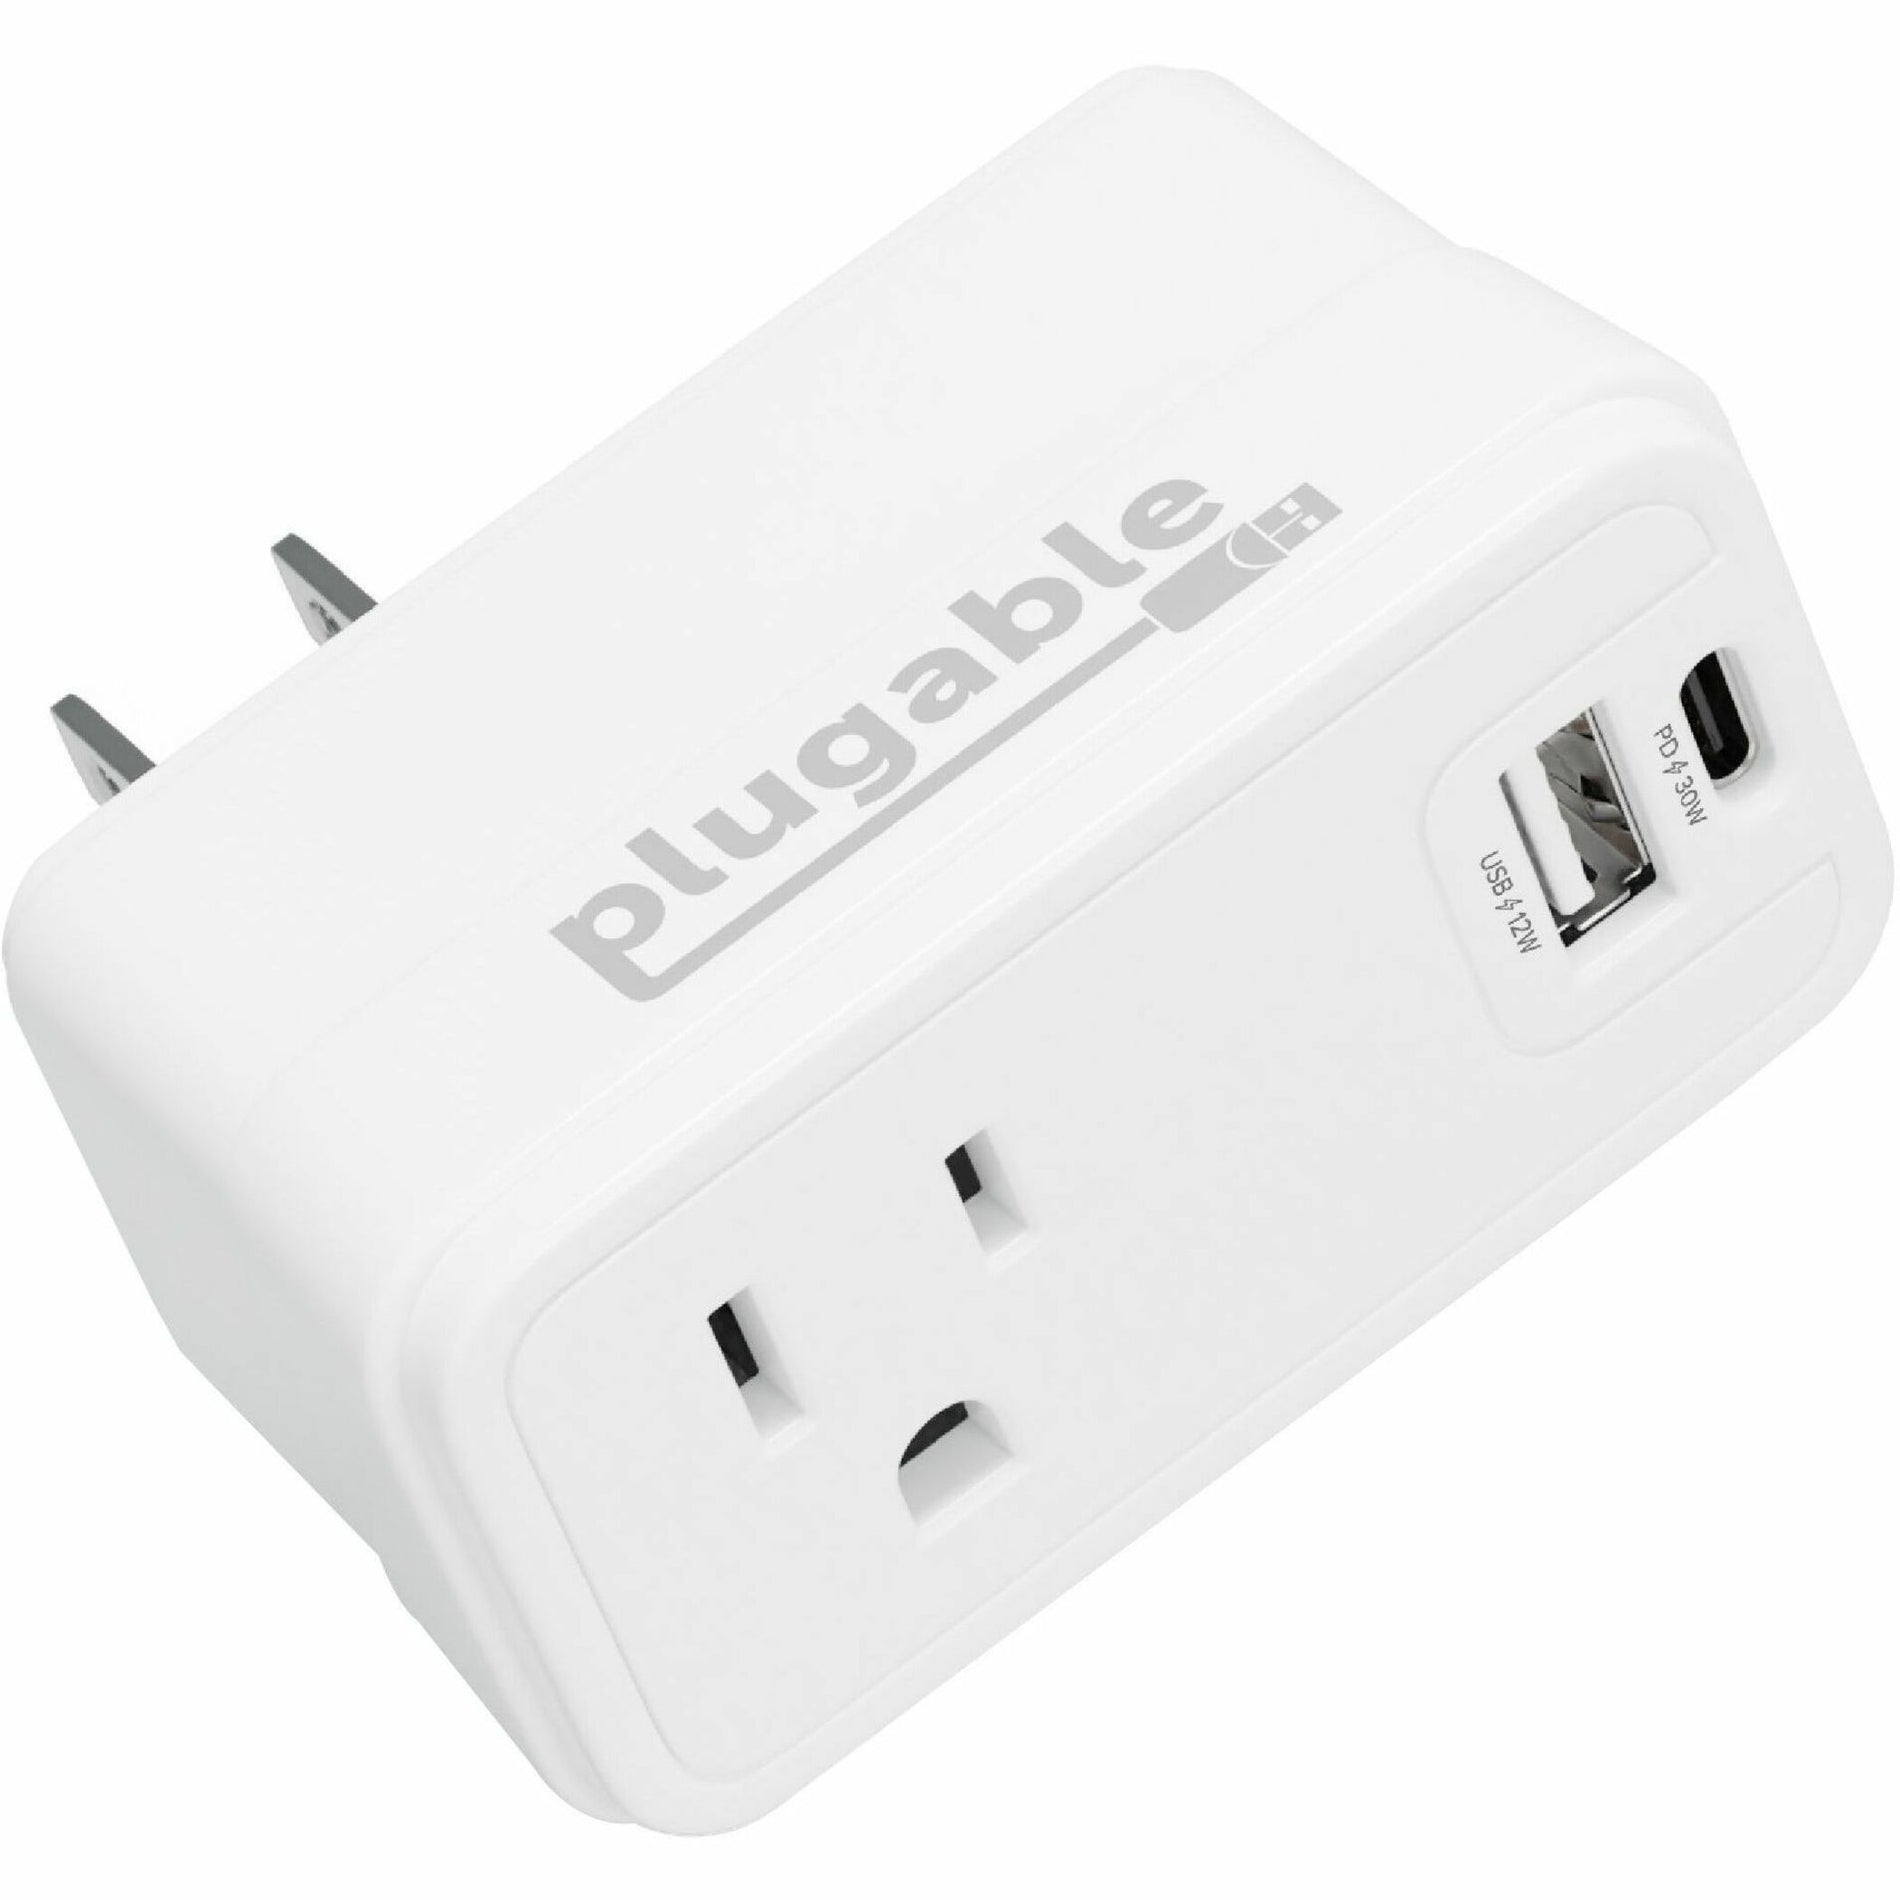 Plugable PS1-CA1 Power Adapter, Universal USB Type-C Charger for Tablets, Notebooks, iPhones, and Smartphones